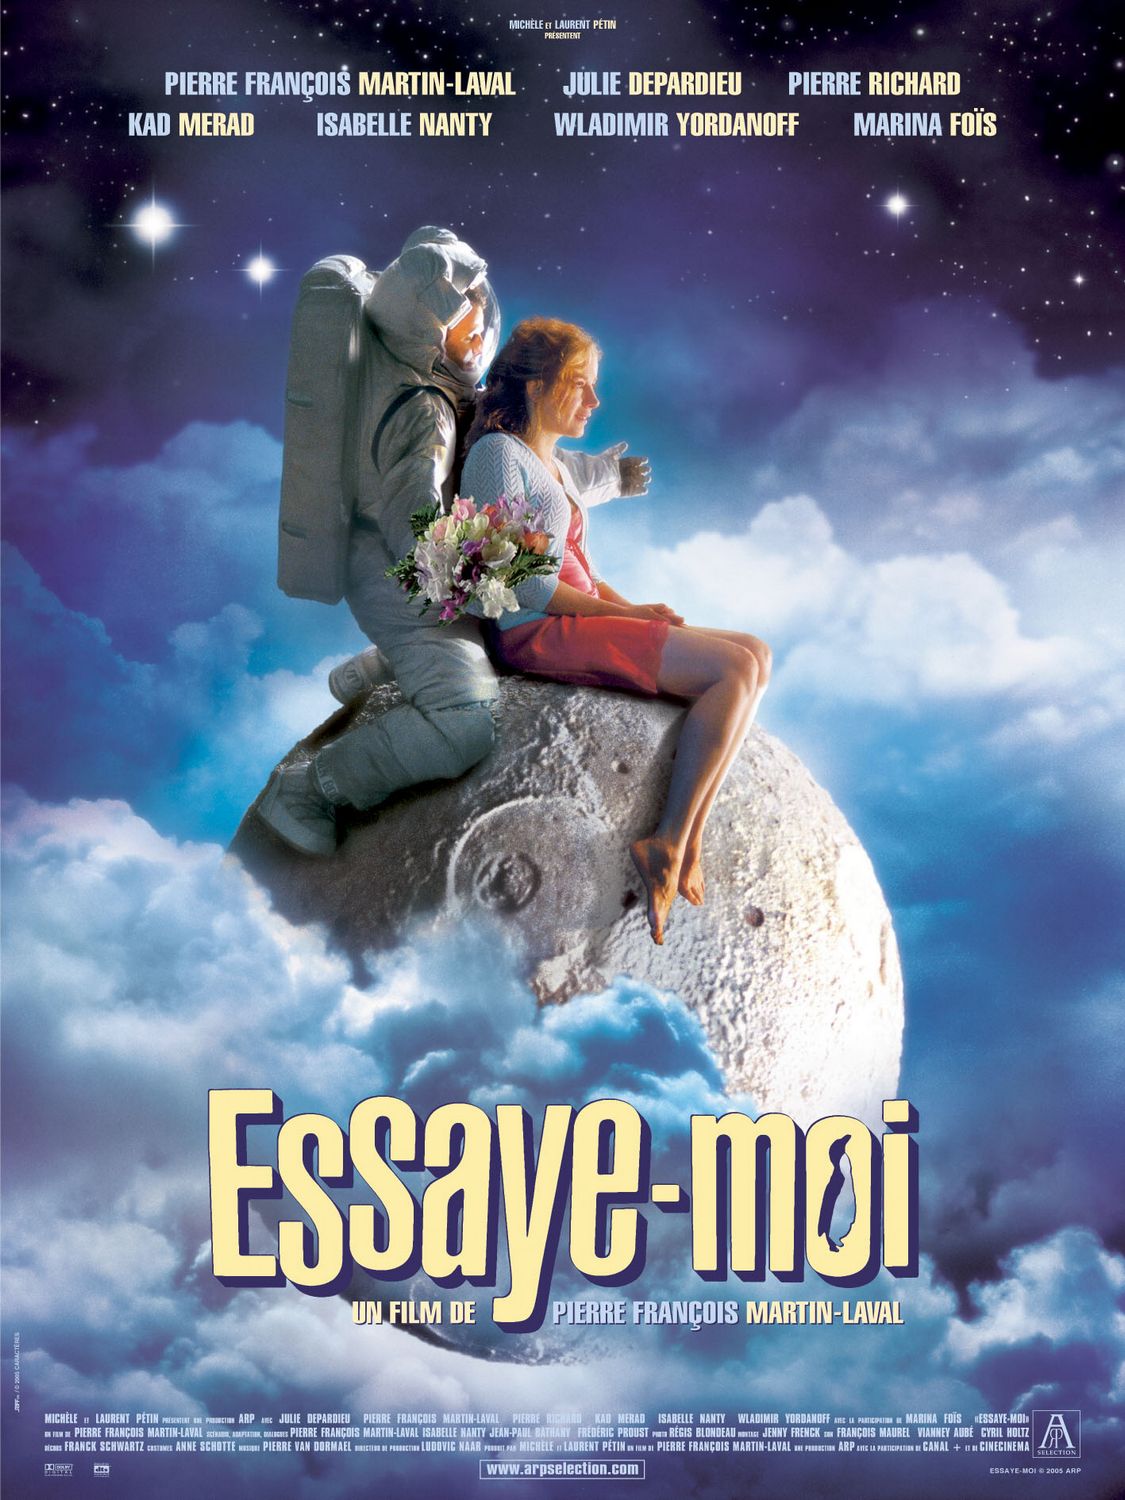 Extra Large Movie Poster Image for Essaye-moi 